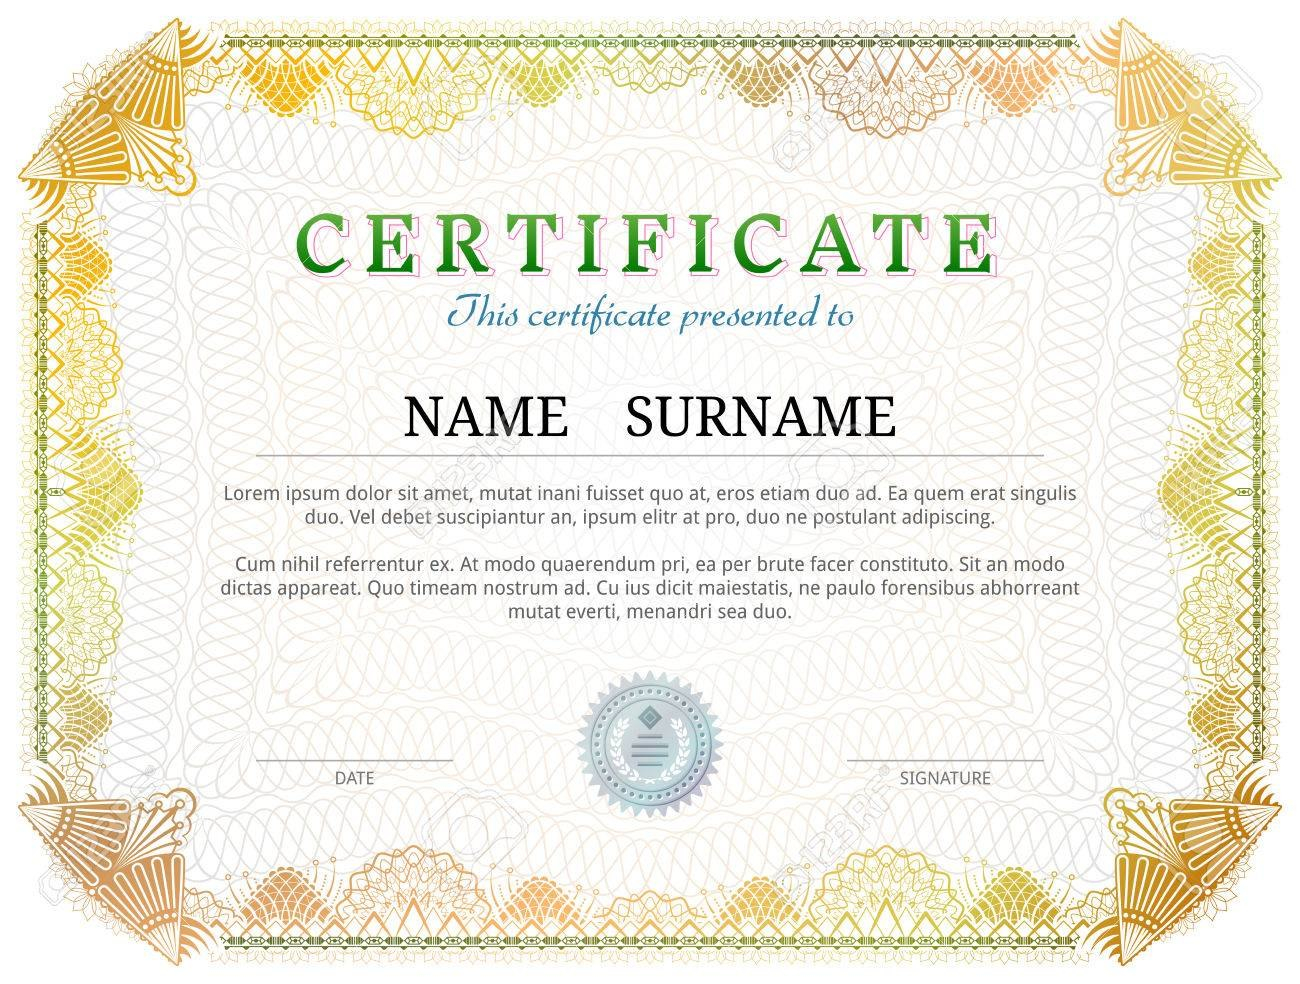 Certificate Template With Guilloche Elements Yellow Diploma intended for Validation Certificate Template